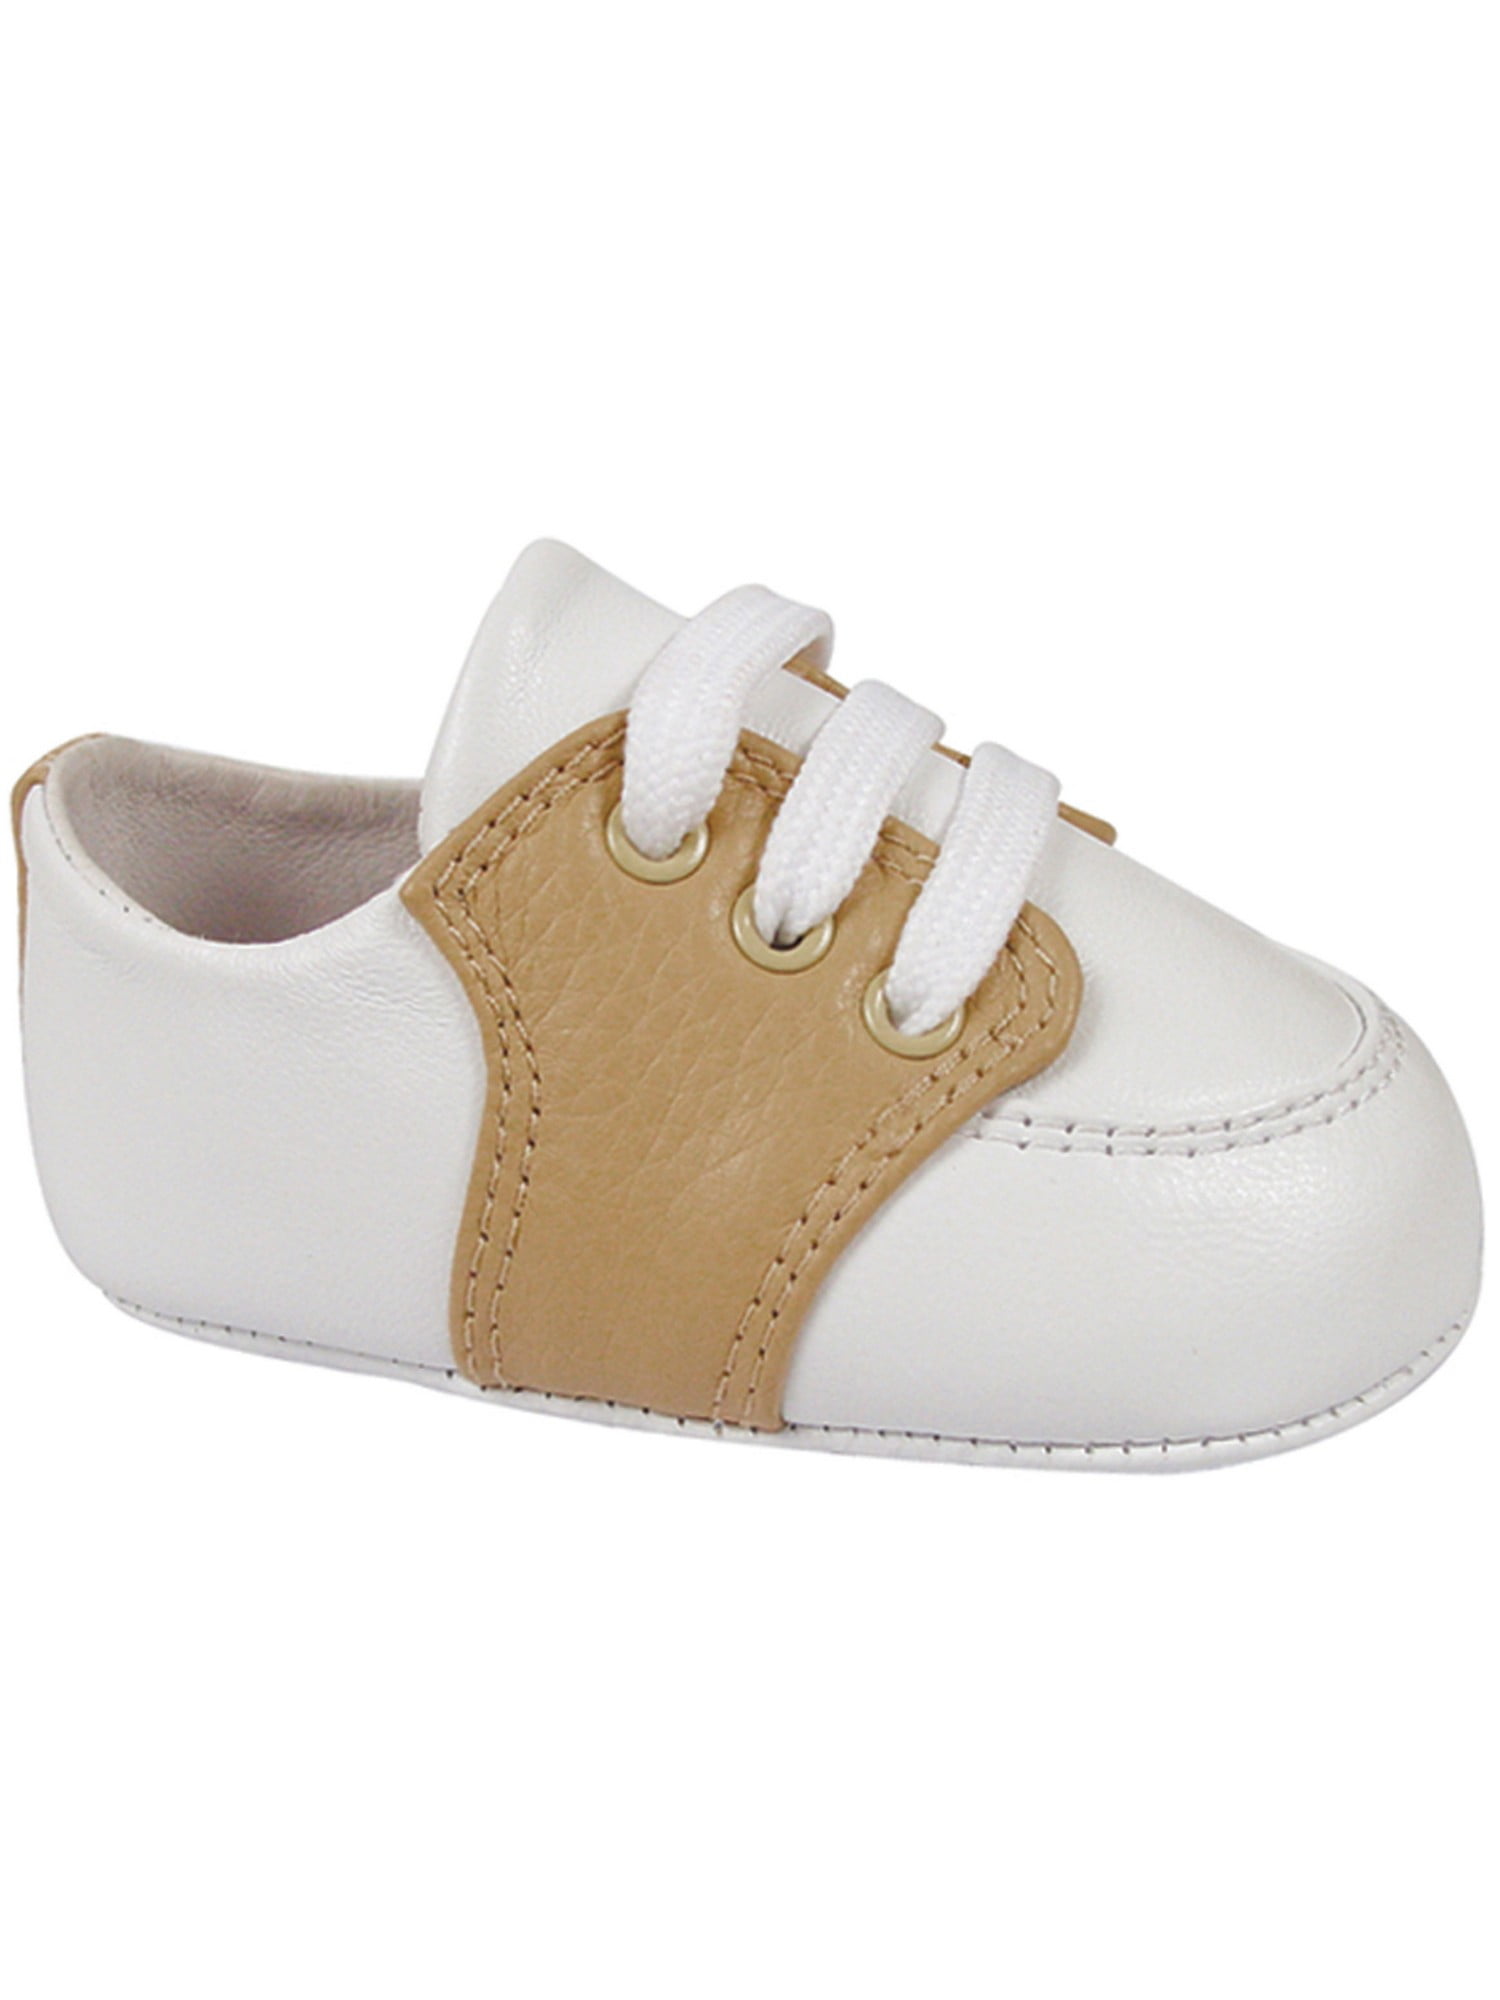 baby deer white shoes